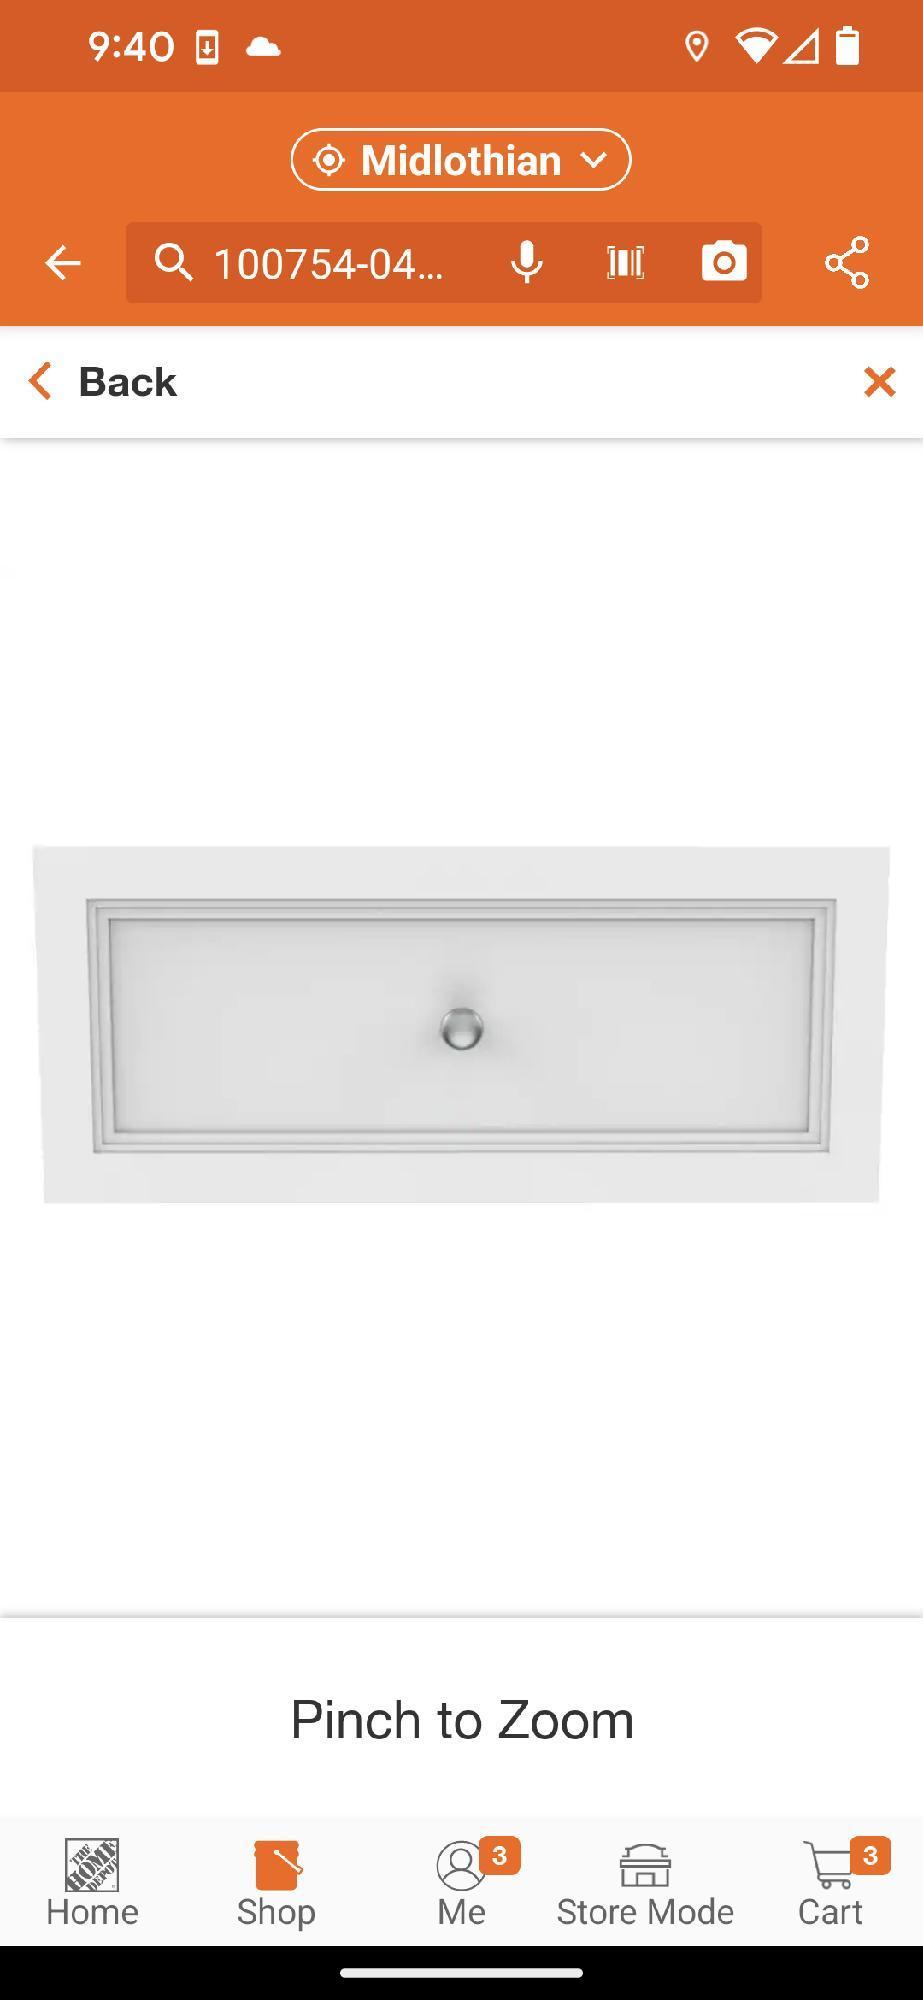 ClosetMaid Selectives 10 in. H x 23.5 in. W White Wood Drawer with Silver Handle, Appears to be New